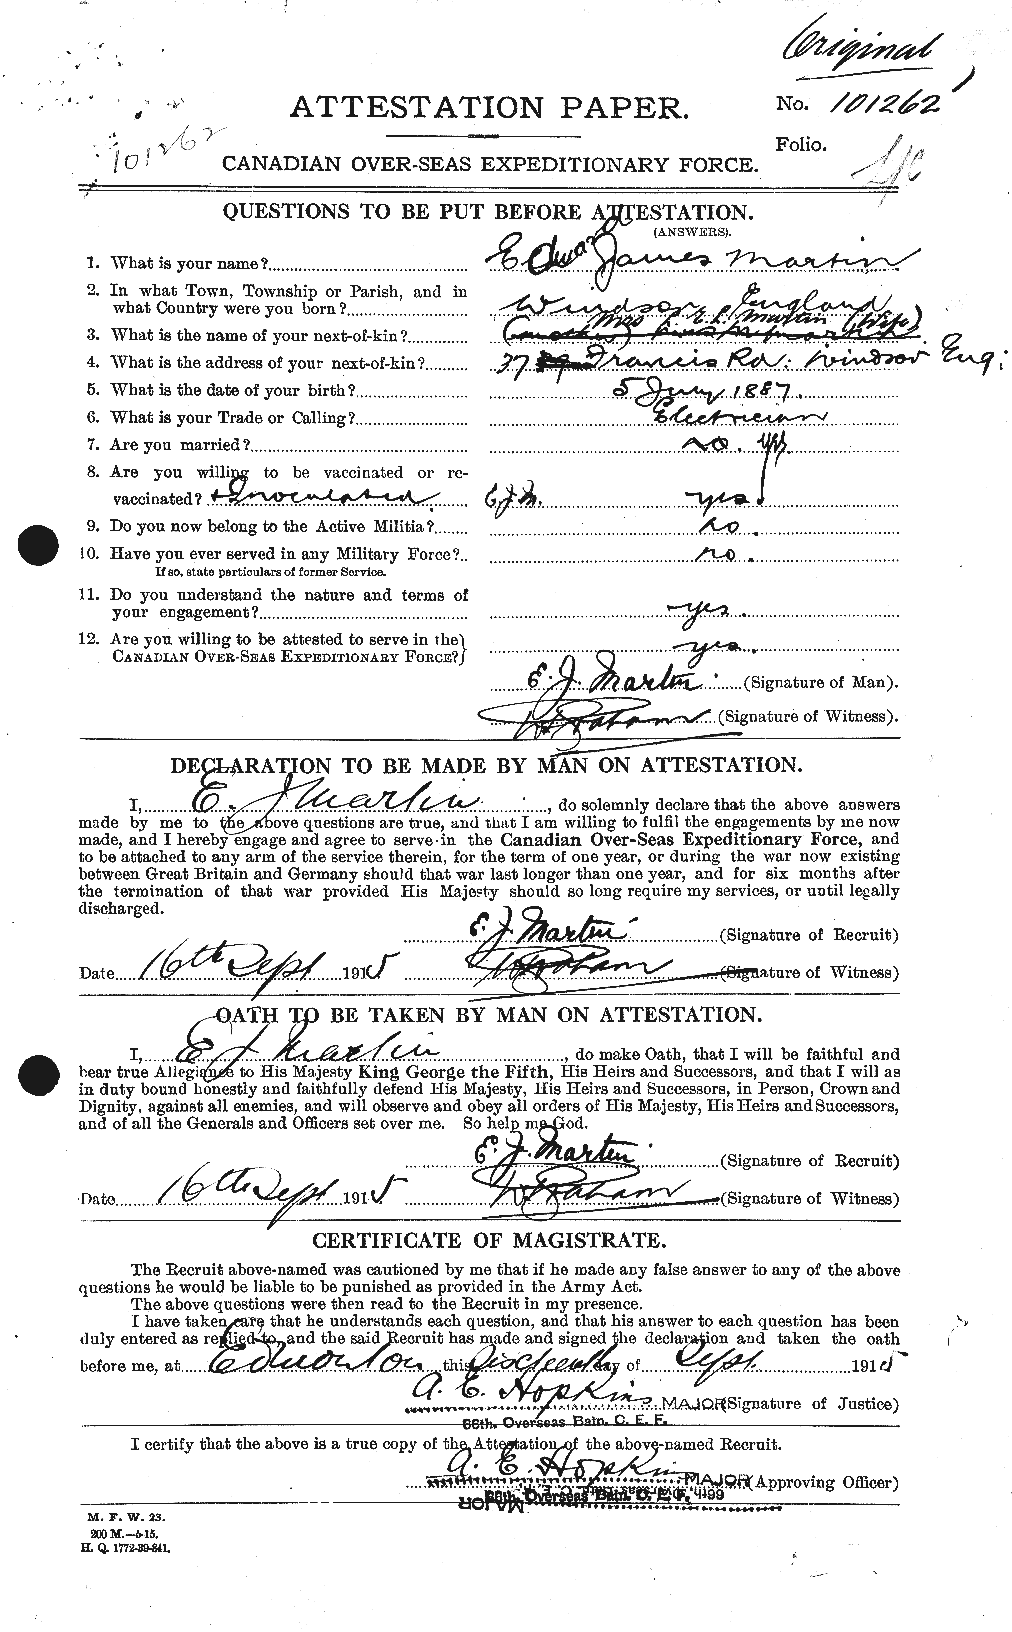 Personnel Records of the First World War - CEF 482881a